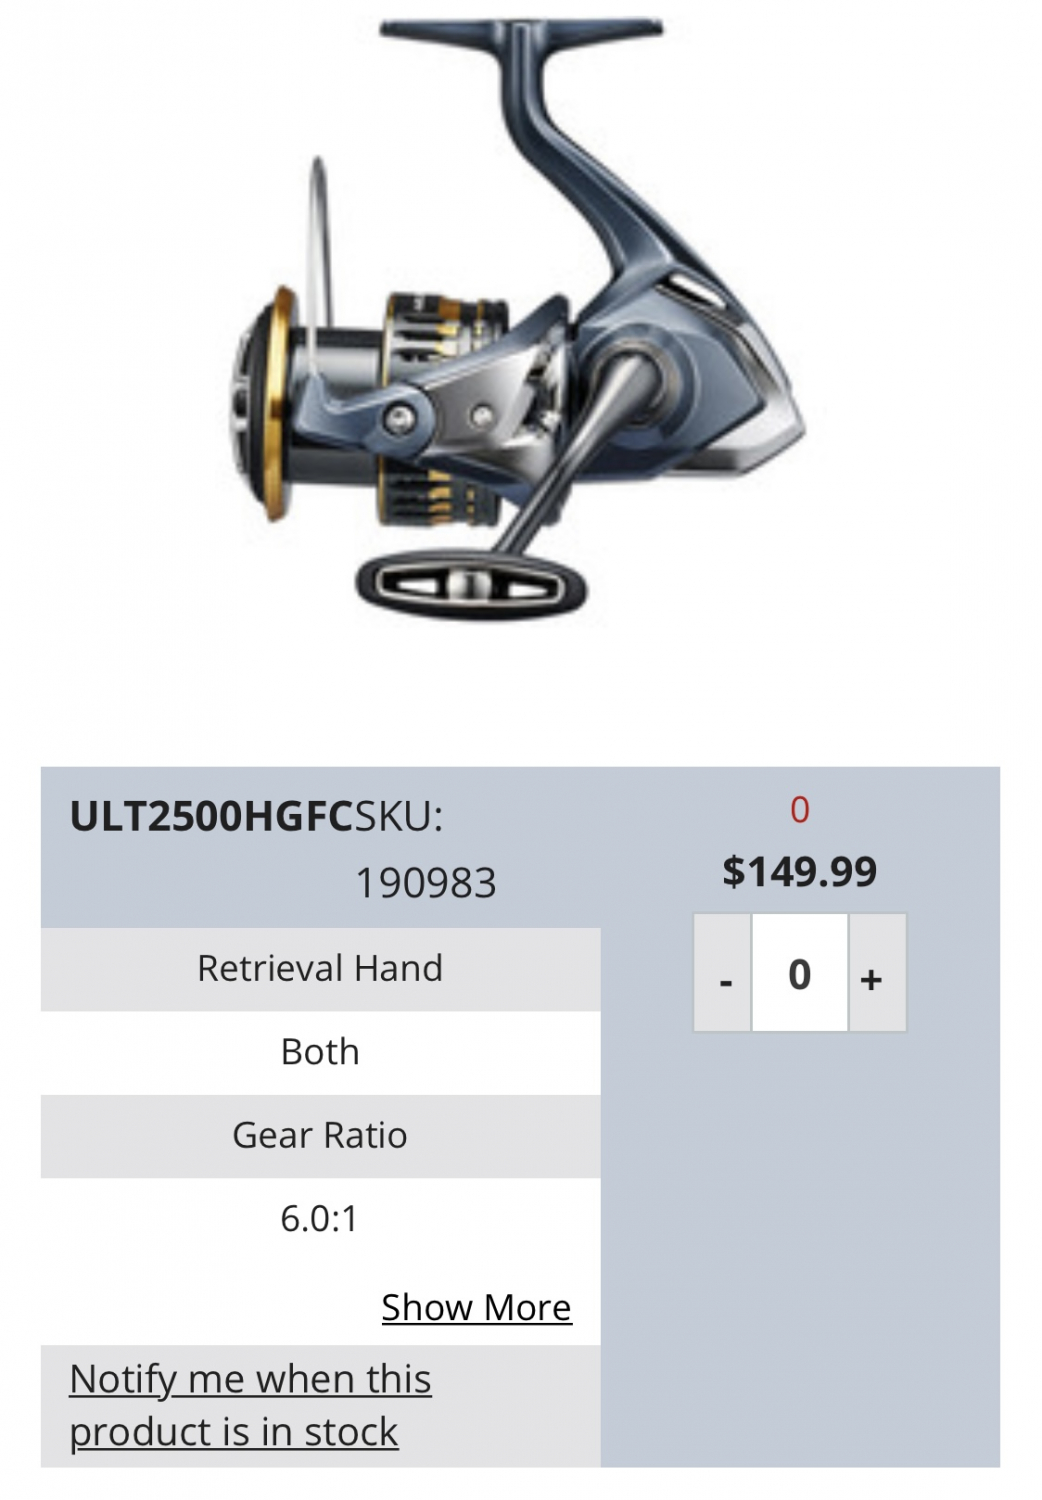 Spinning Reel Shimano ULTEGRA 2012 ✴️️️ Front Drag ✓ TOP PRICE - Angling  PRO Shop